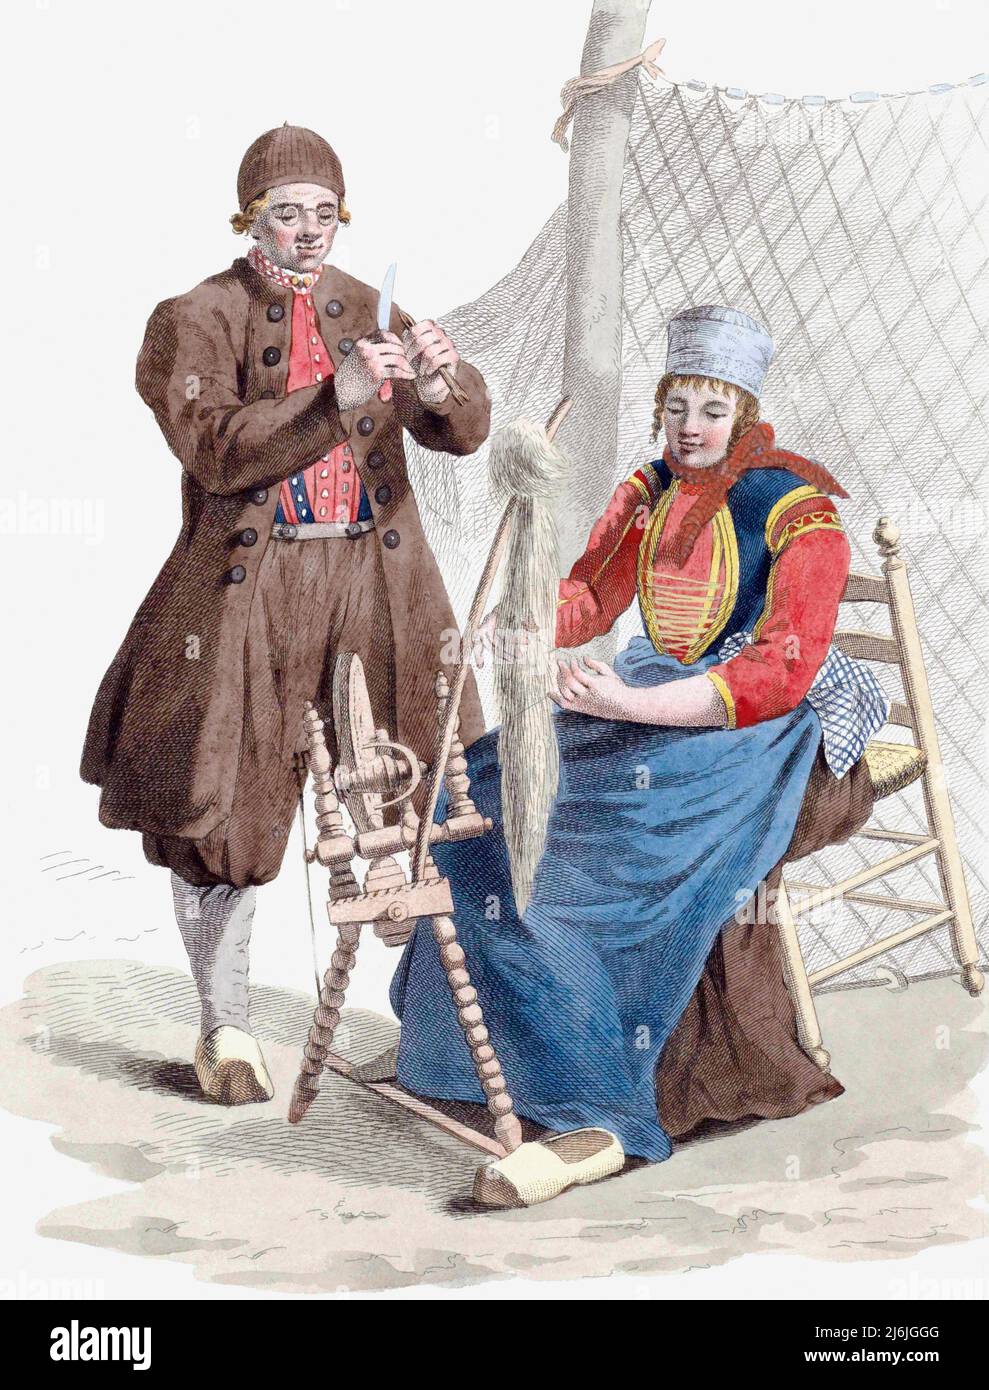 A 19th century Dutch fisherman and his wife mending nets.  The wife spins the yarn on a spinning wheel and the fisherman uses it to mend the nets. After a work by Ludwig Gottlieb Portman from a drawing by Jacques Kuyper. Stock Photo